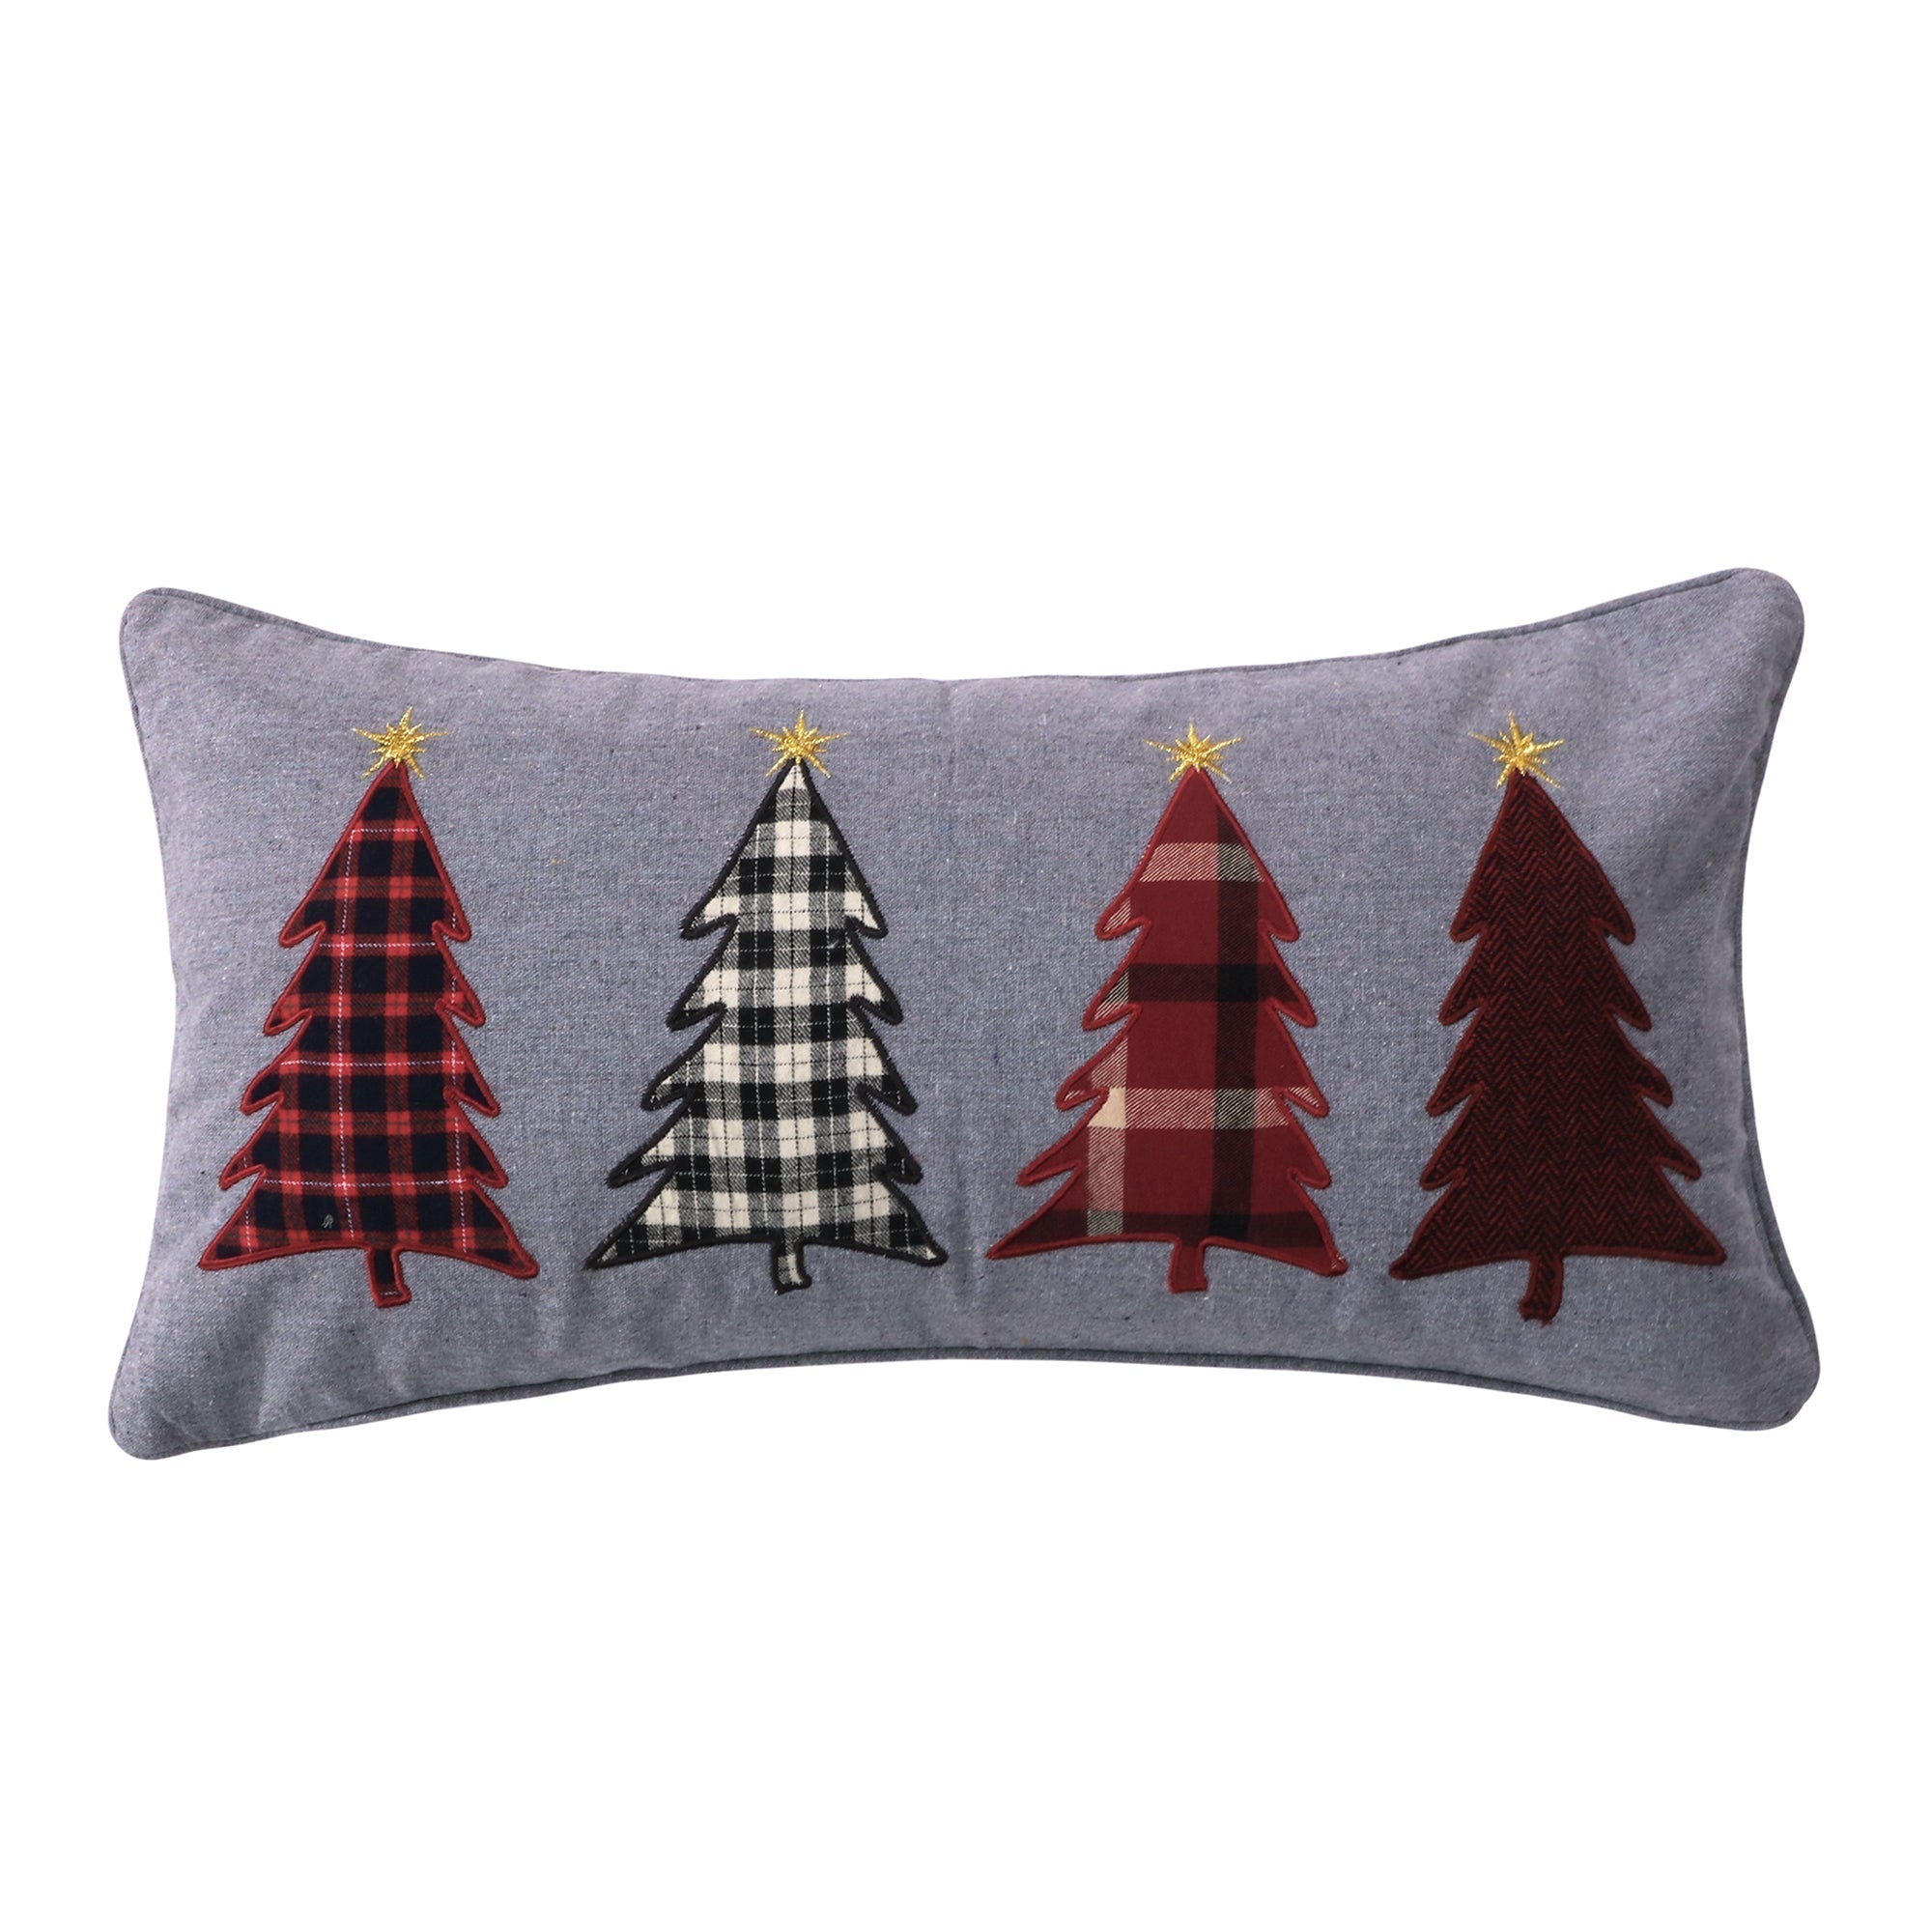 Rudolph Appliqued Trees Pillow